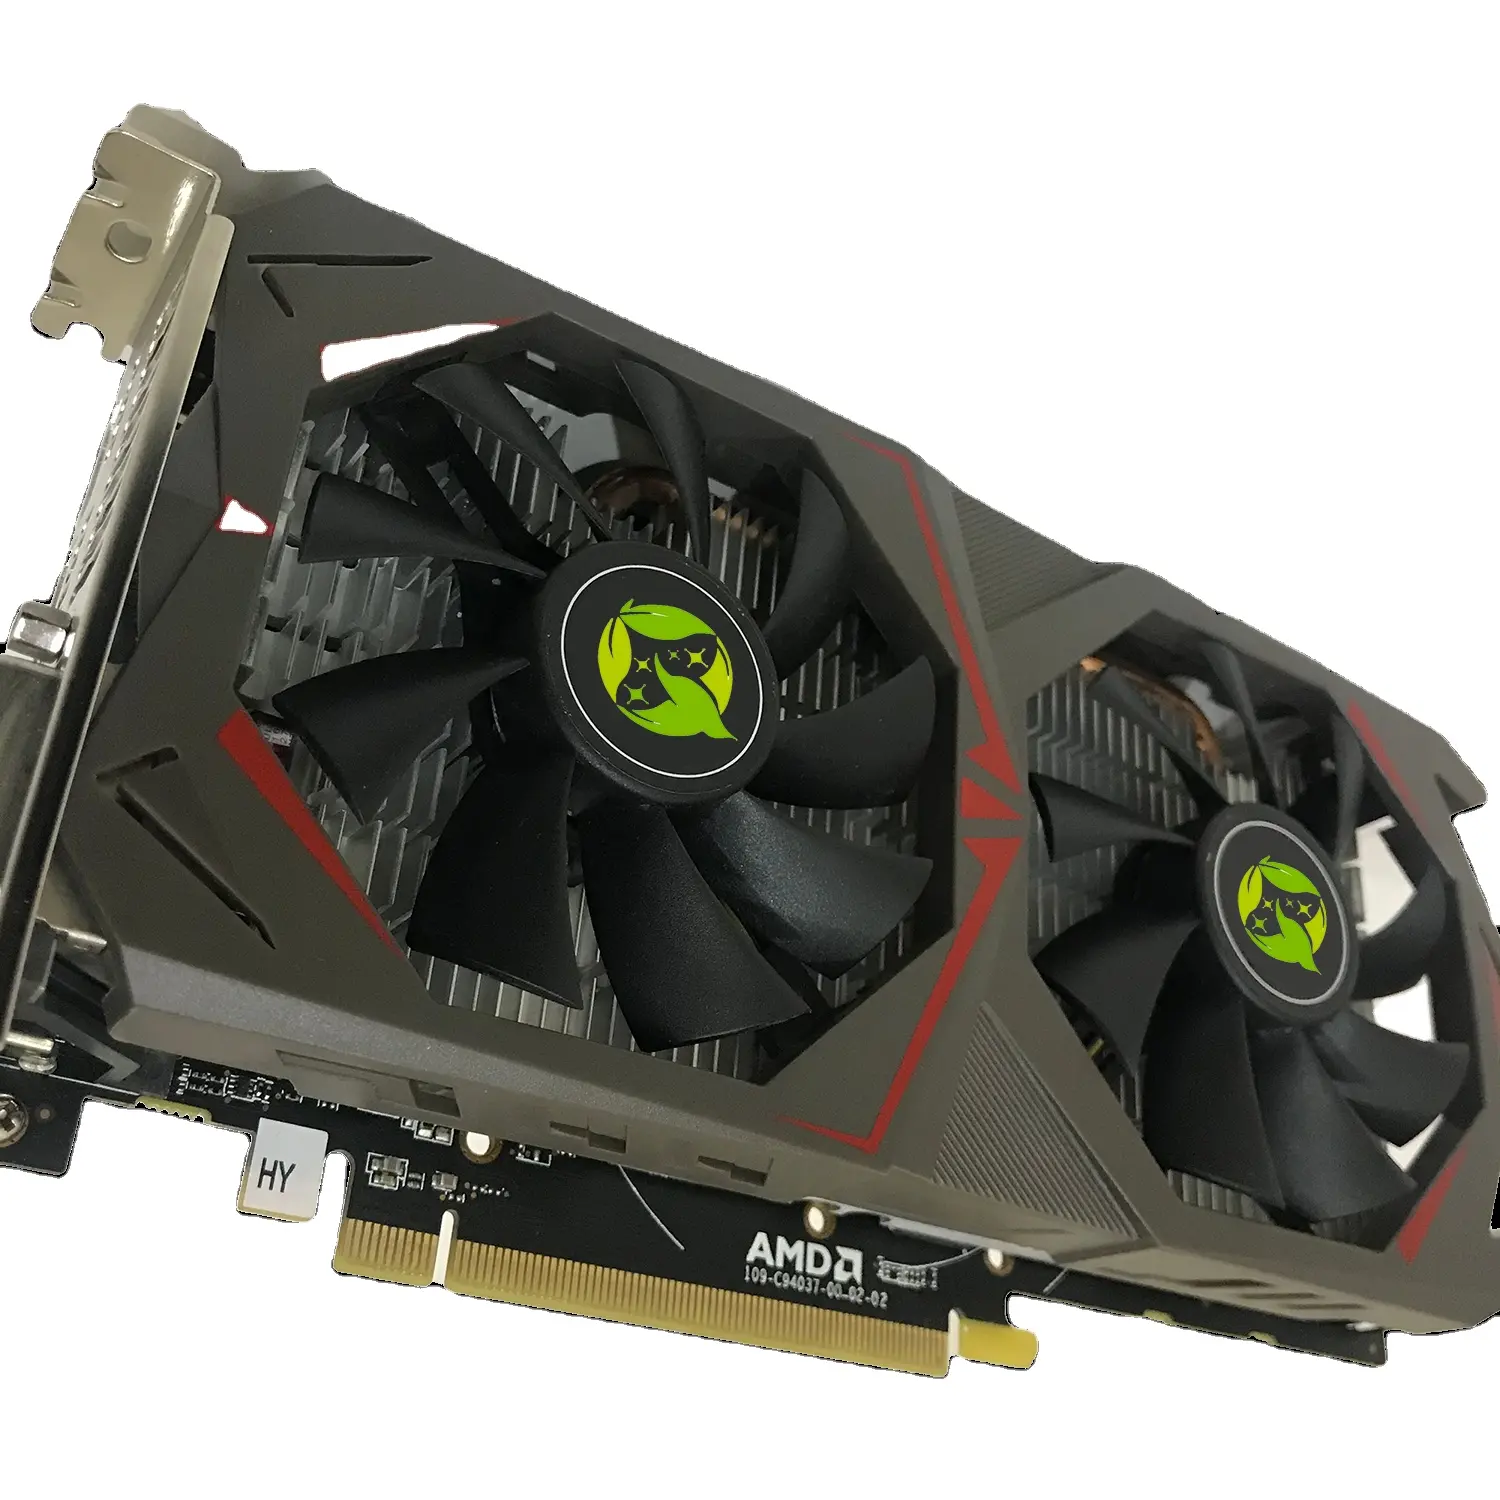 Hot selling product rtx graphic card rx 588 8g graphics cards gtx graphics card